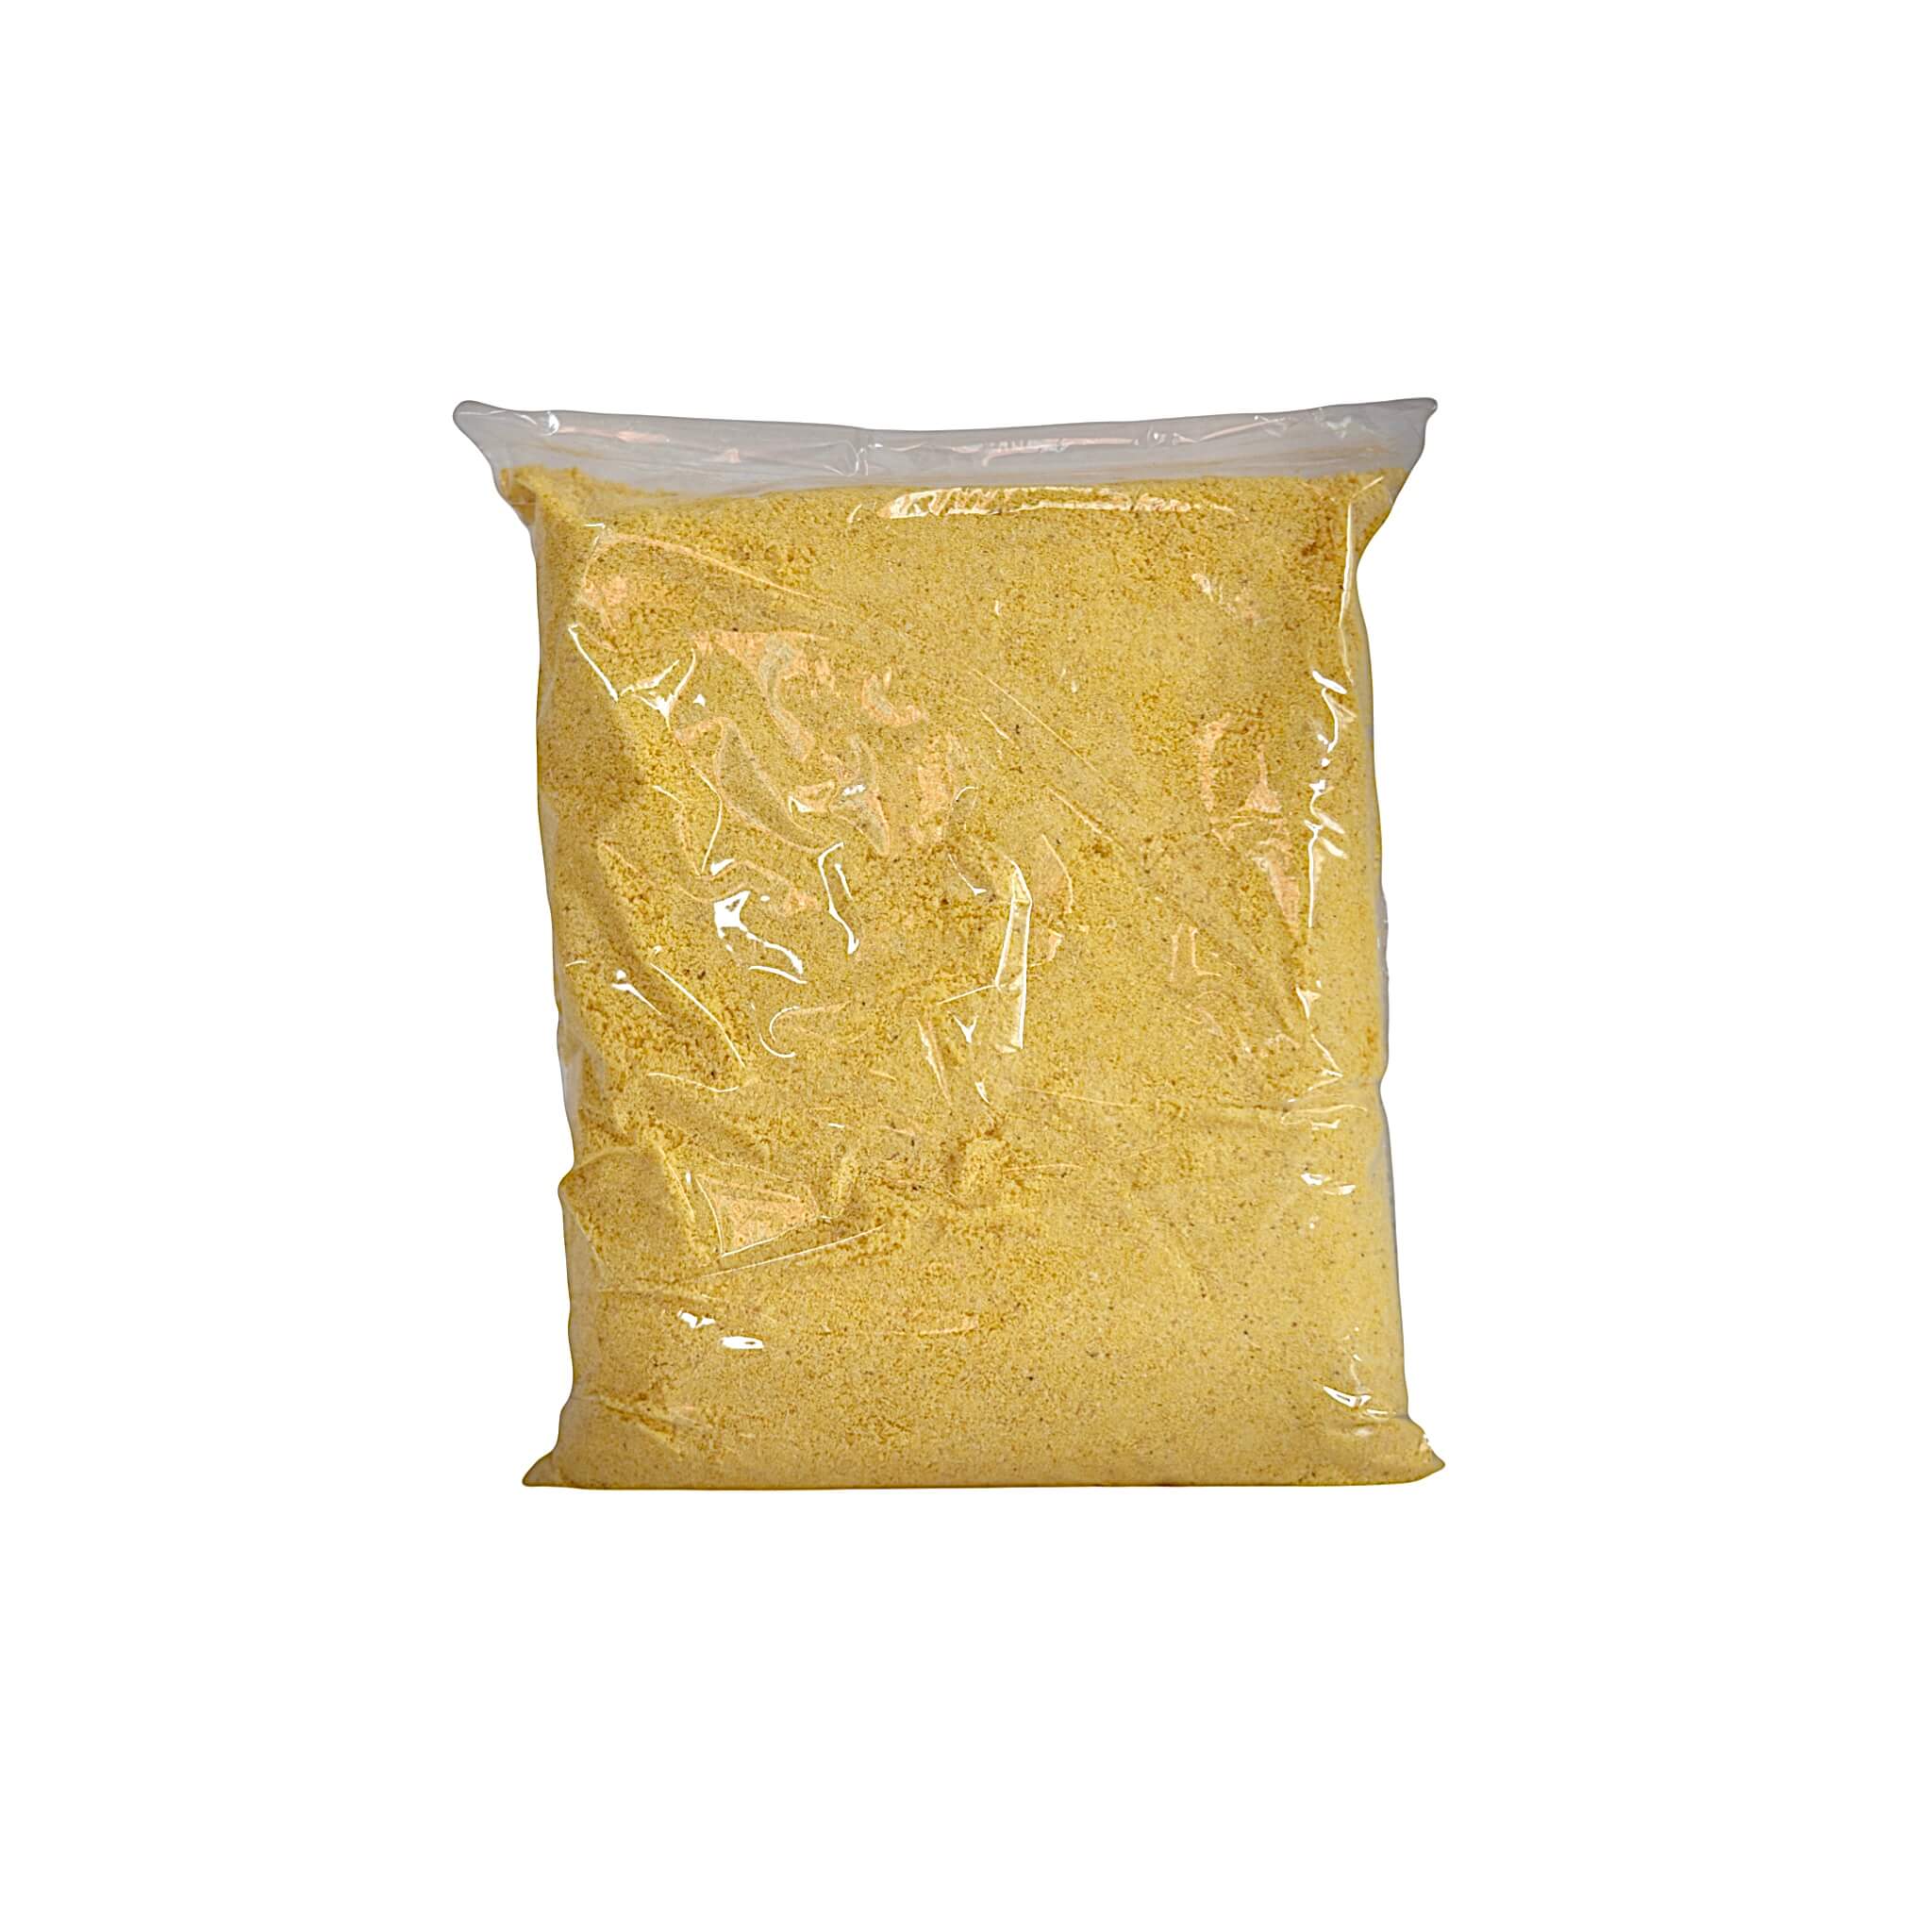 A sealed packed of yellow garri